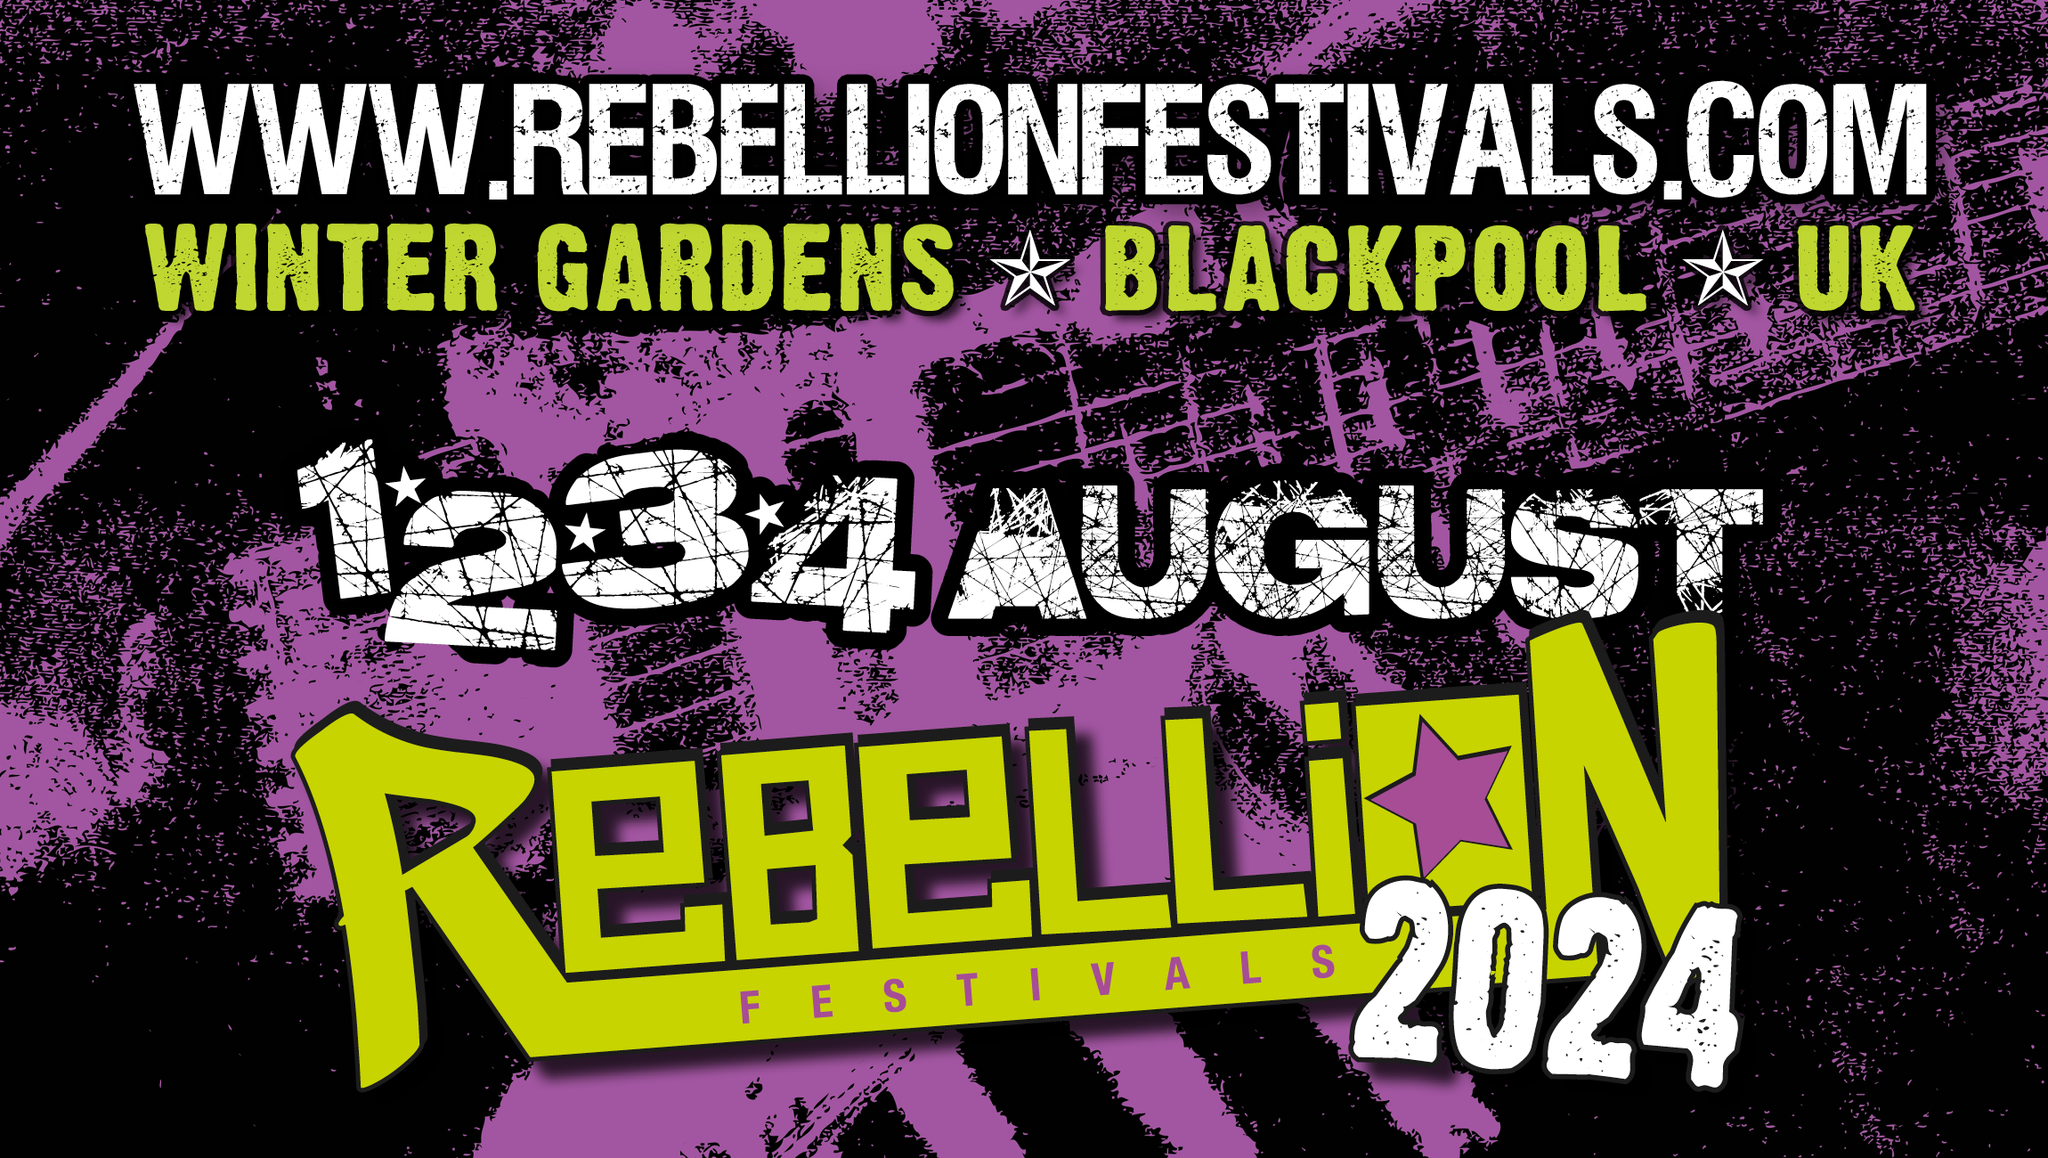 Rebellion Festival is the largest INDEPENDENT Punk / Alternative festival in the world. Over 4 days every August in Blackpool!